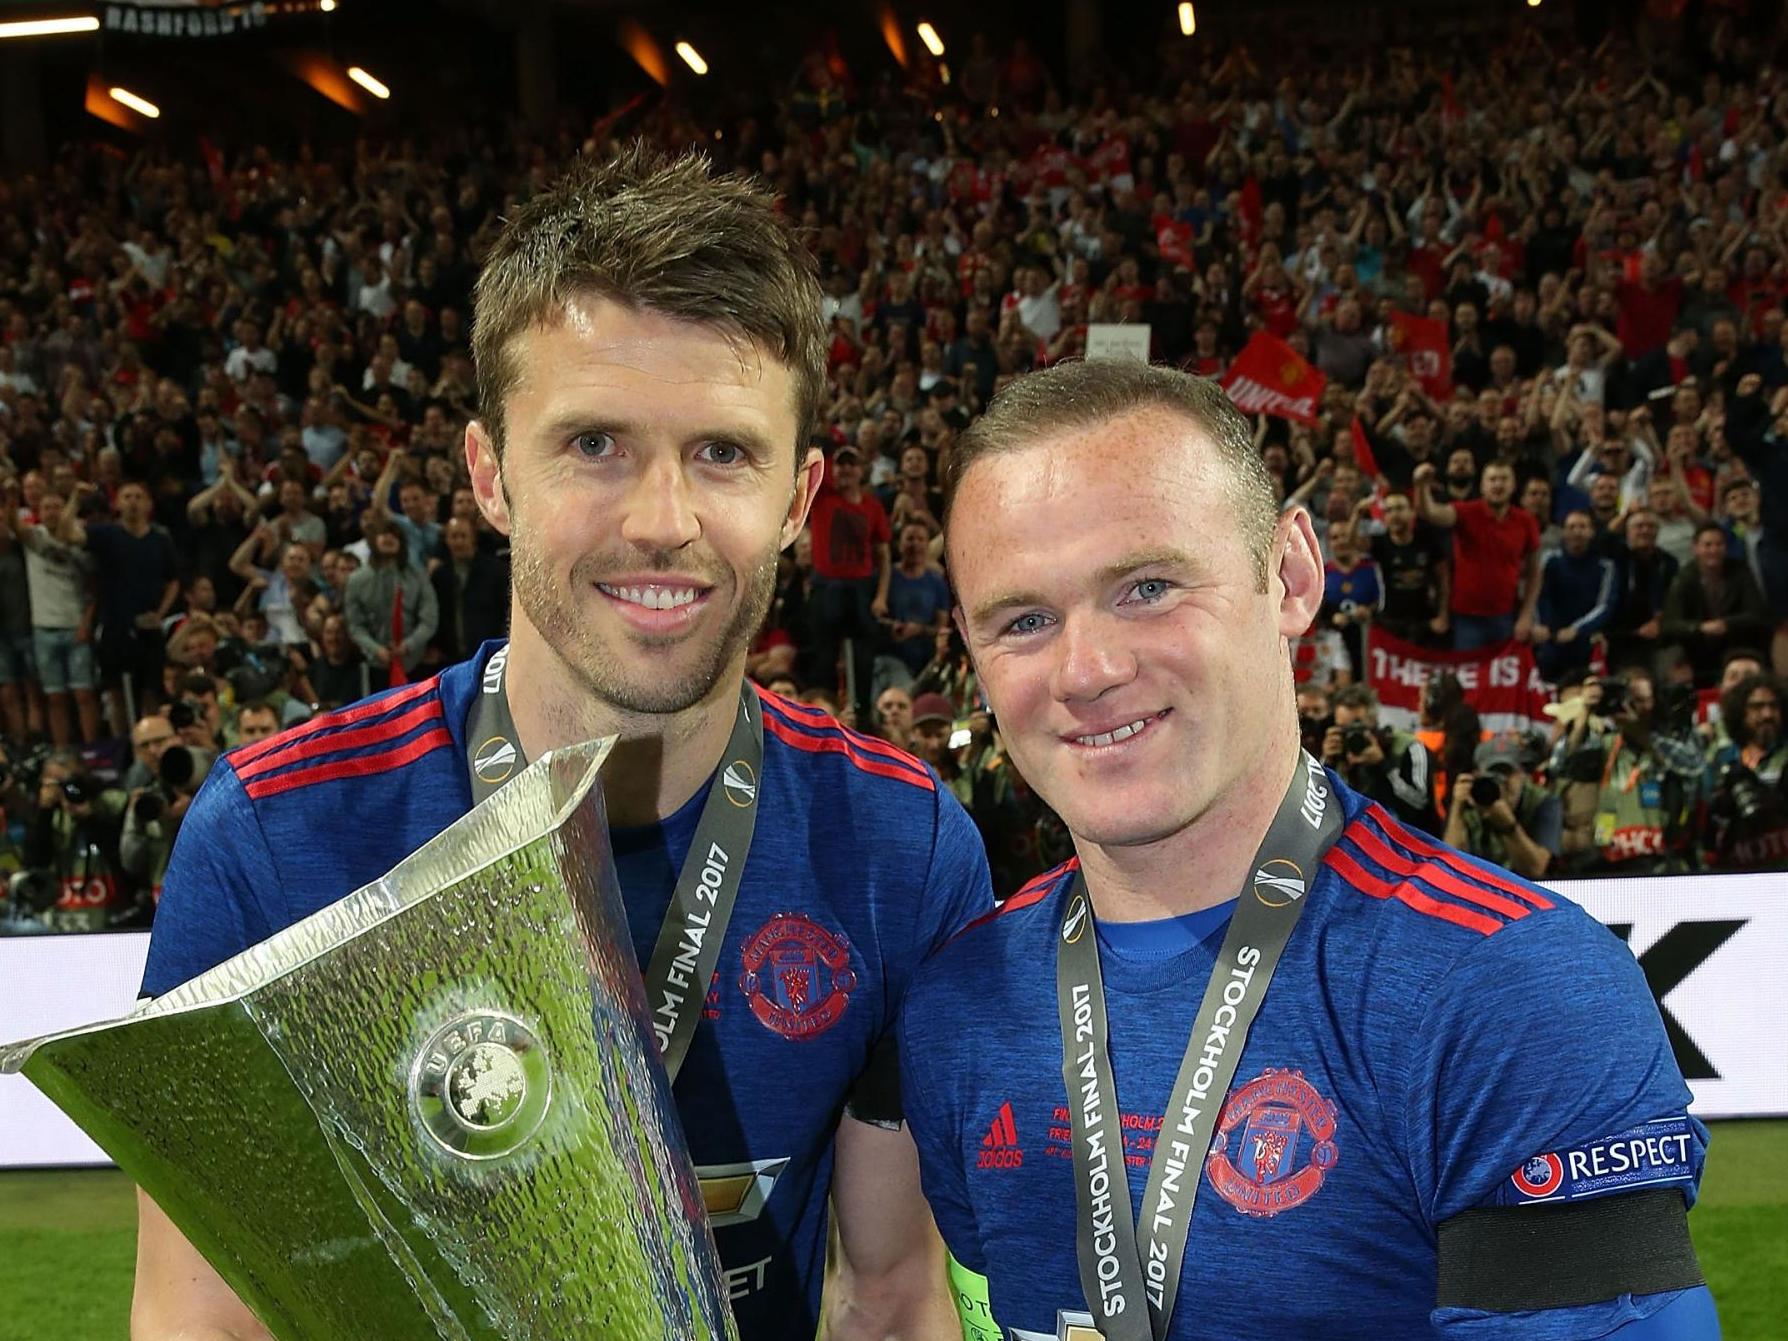 Michael Carrick and Wayne Rooney of Manchester United